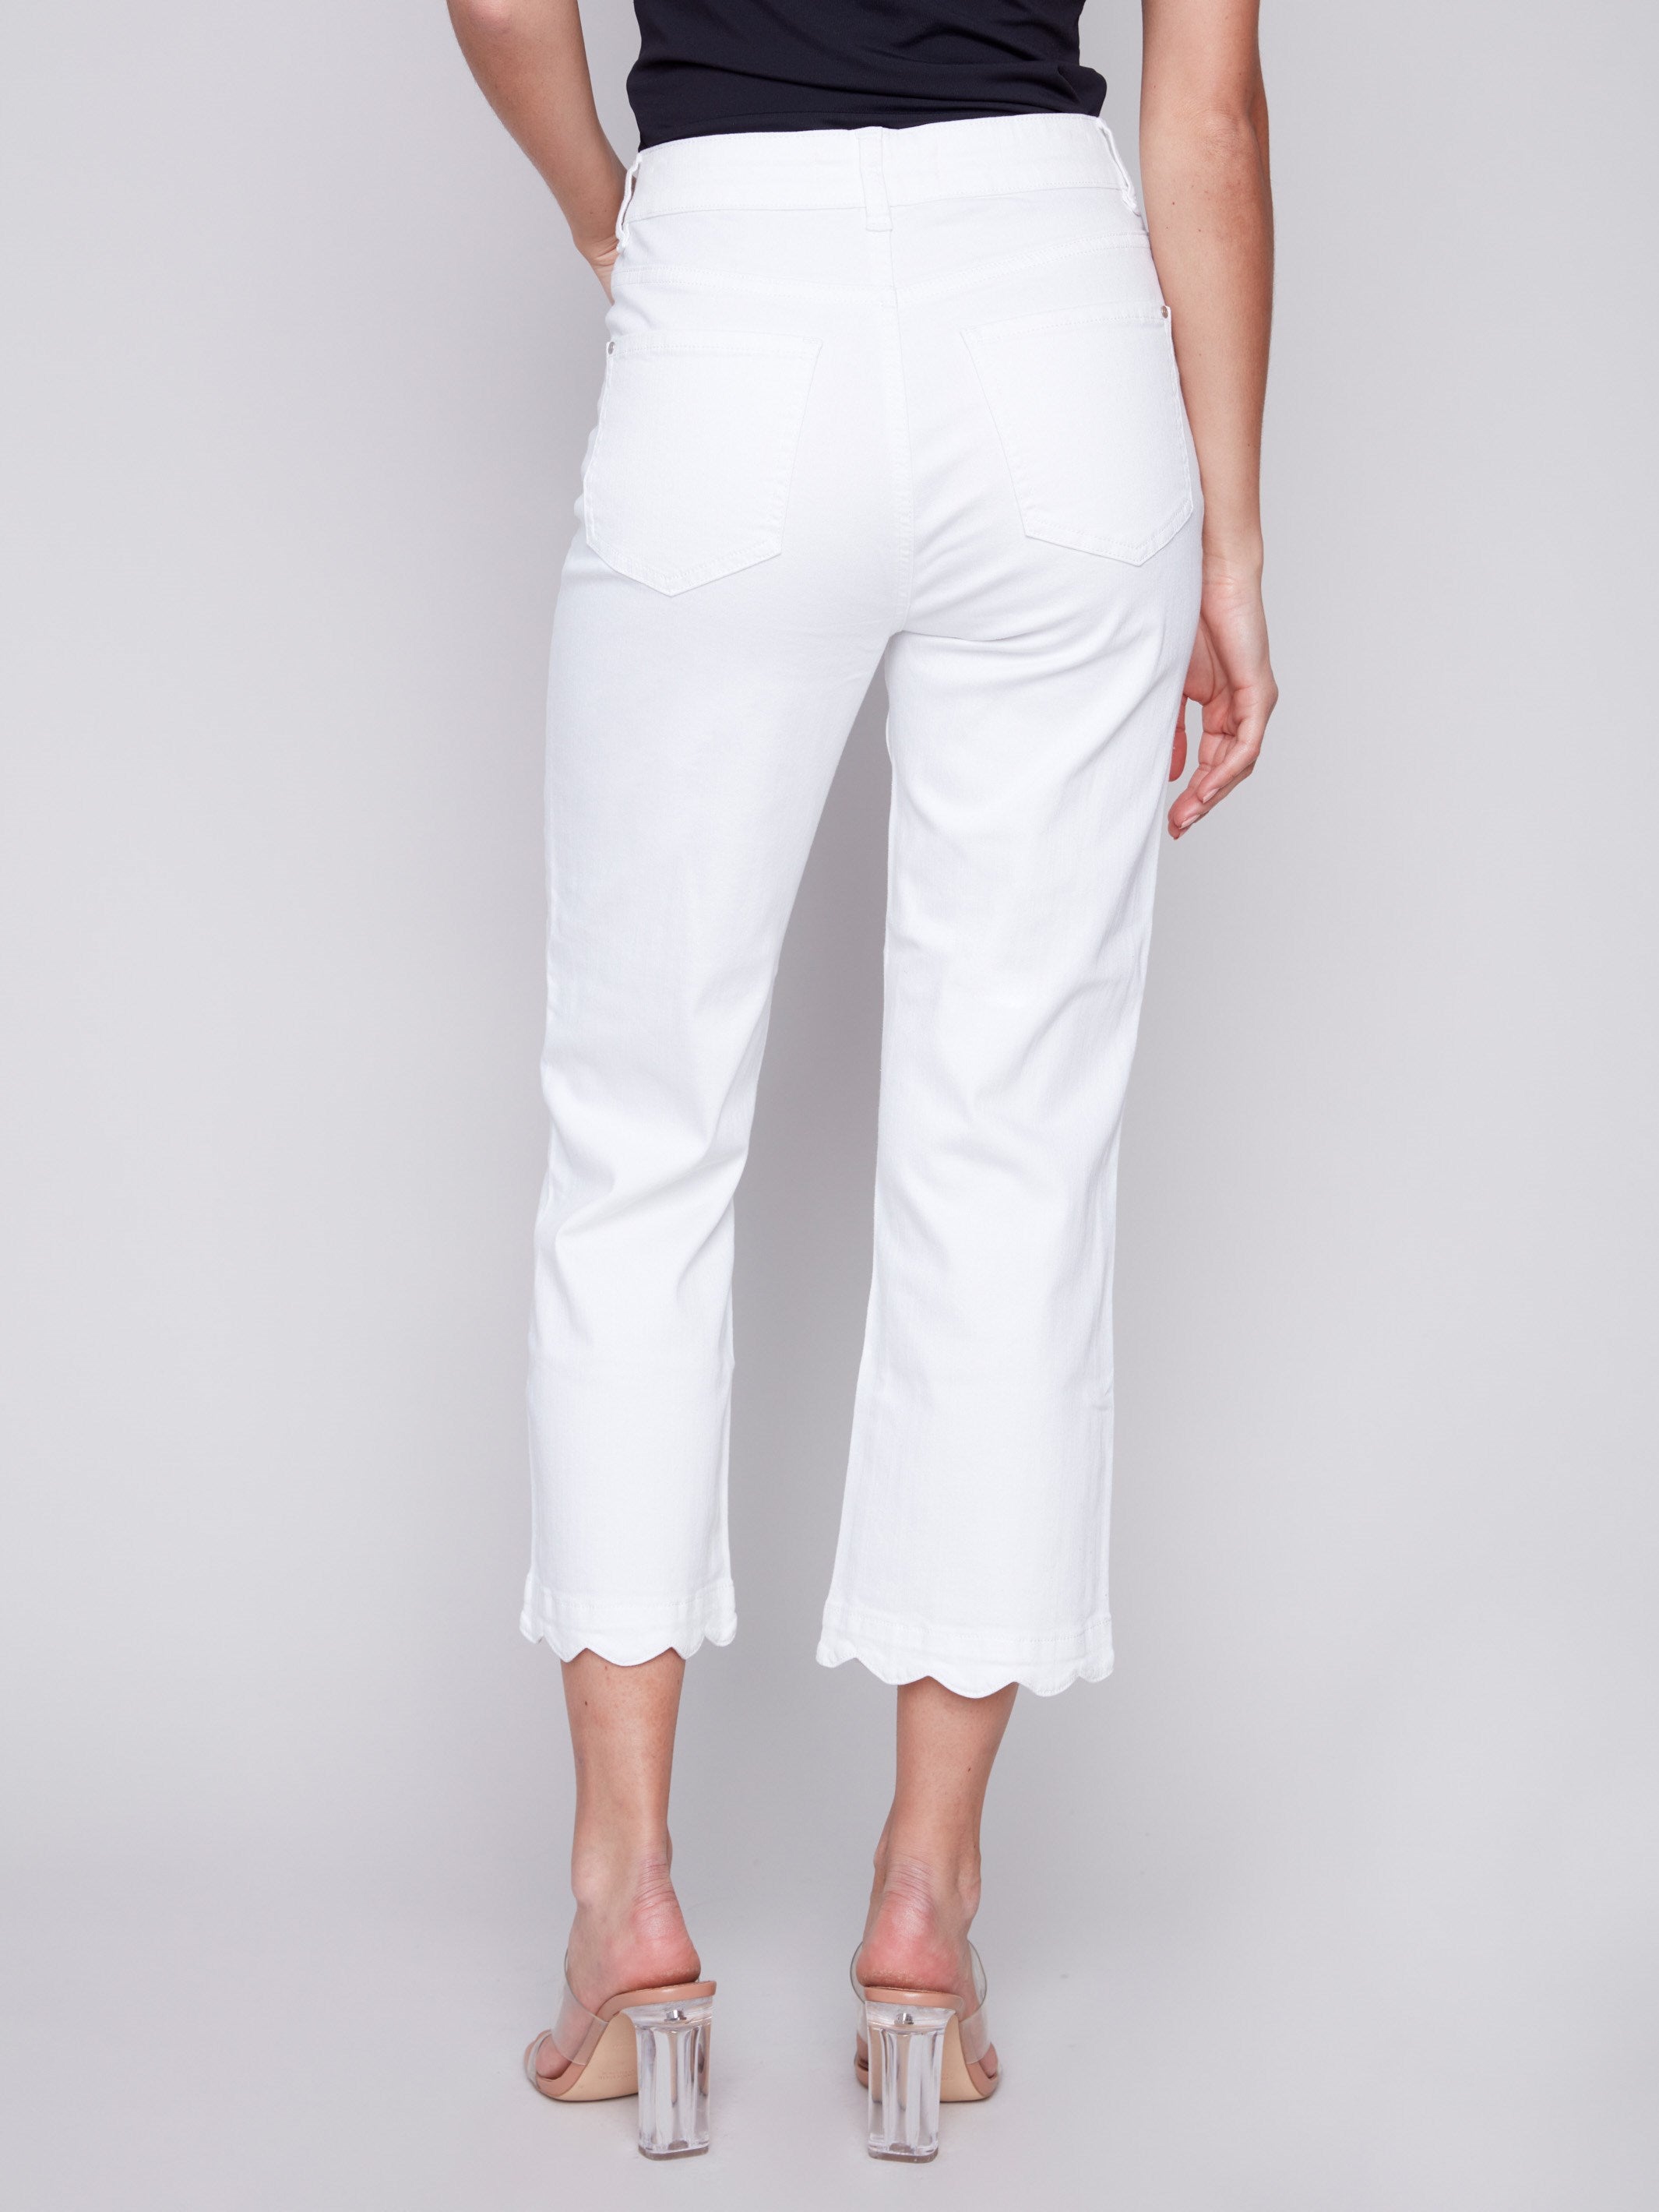 Straight Leg Twill Jeans with Scallop Hem - White - Charlie B Collection Canada - Image 3